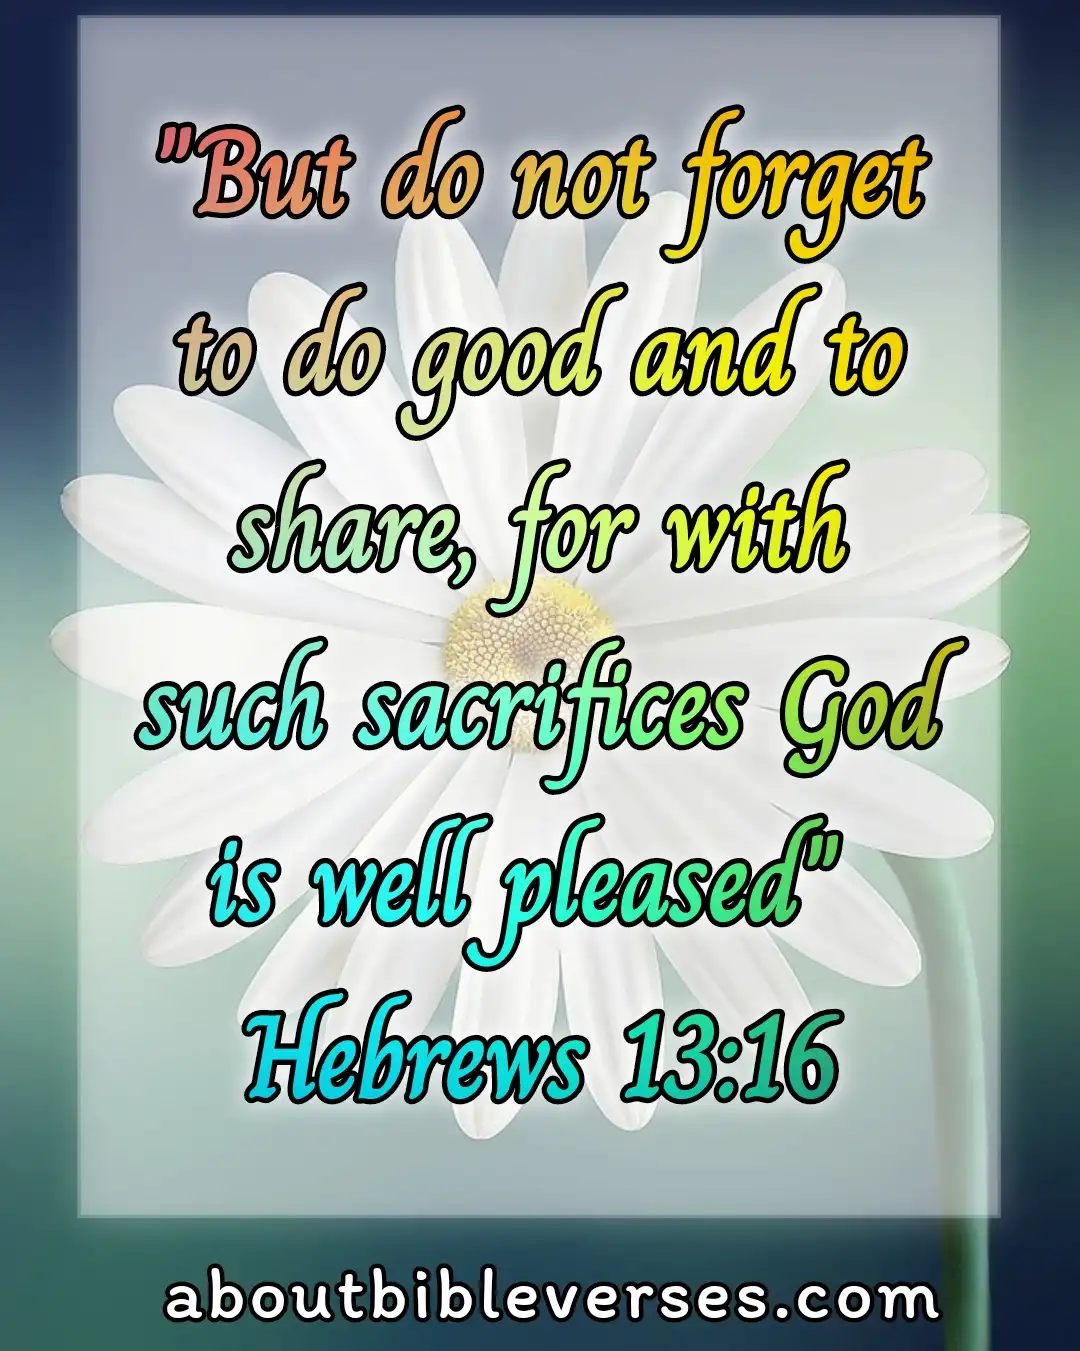 Bible say about Selfishness (Hebrews 13:16)